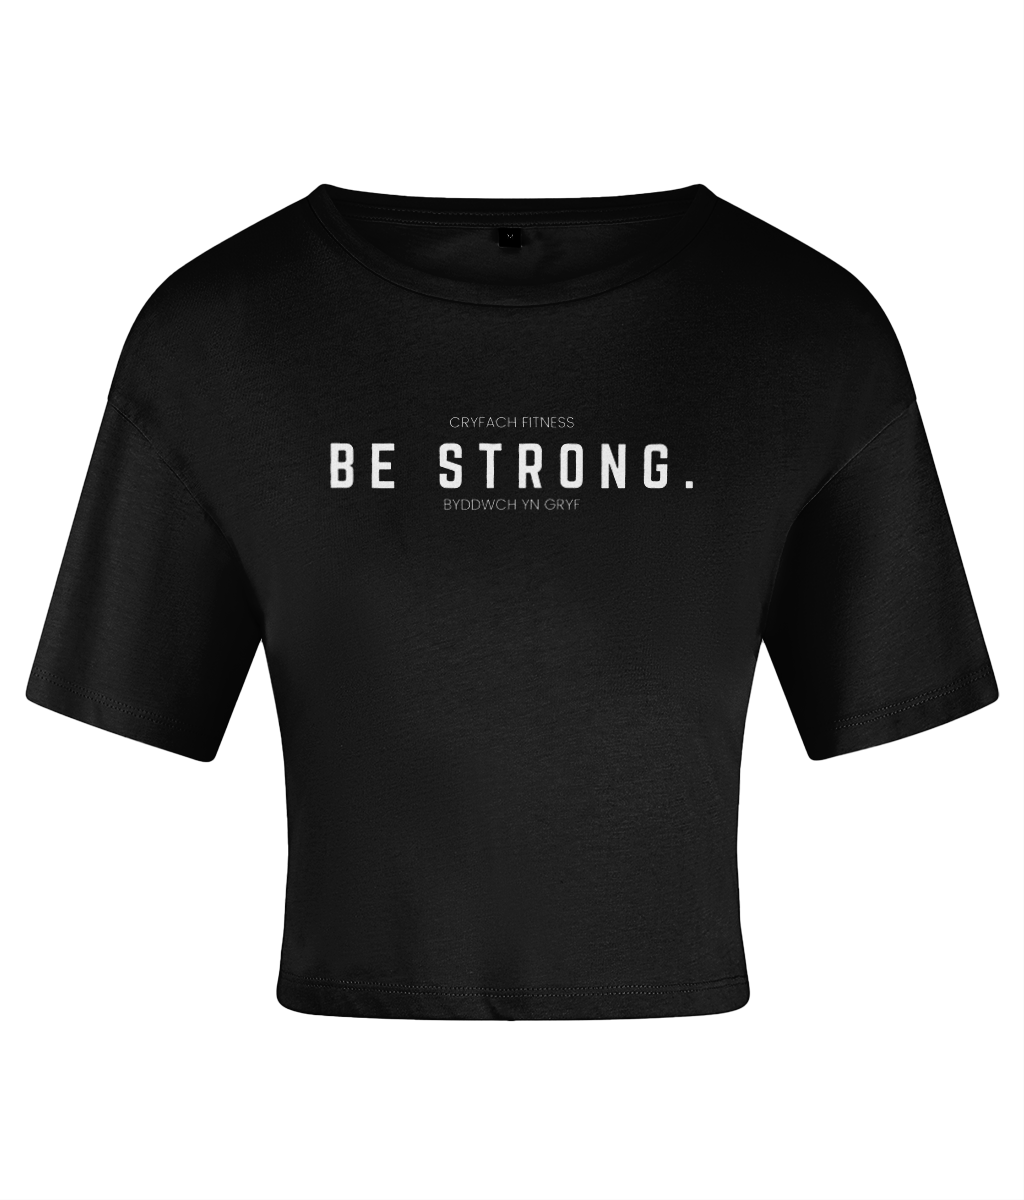 BE STRONG CROP TOP